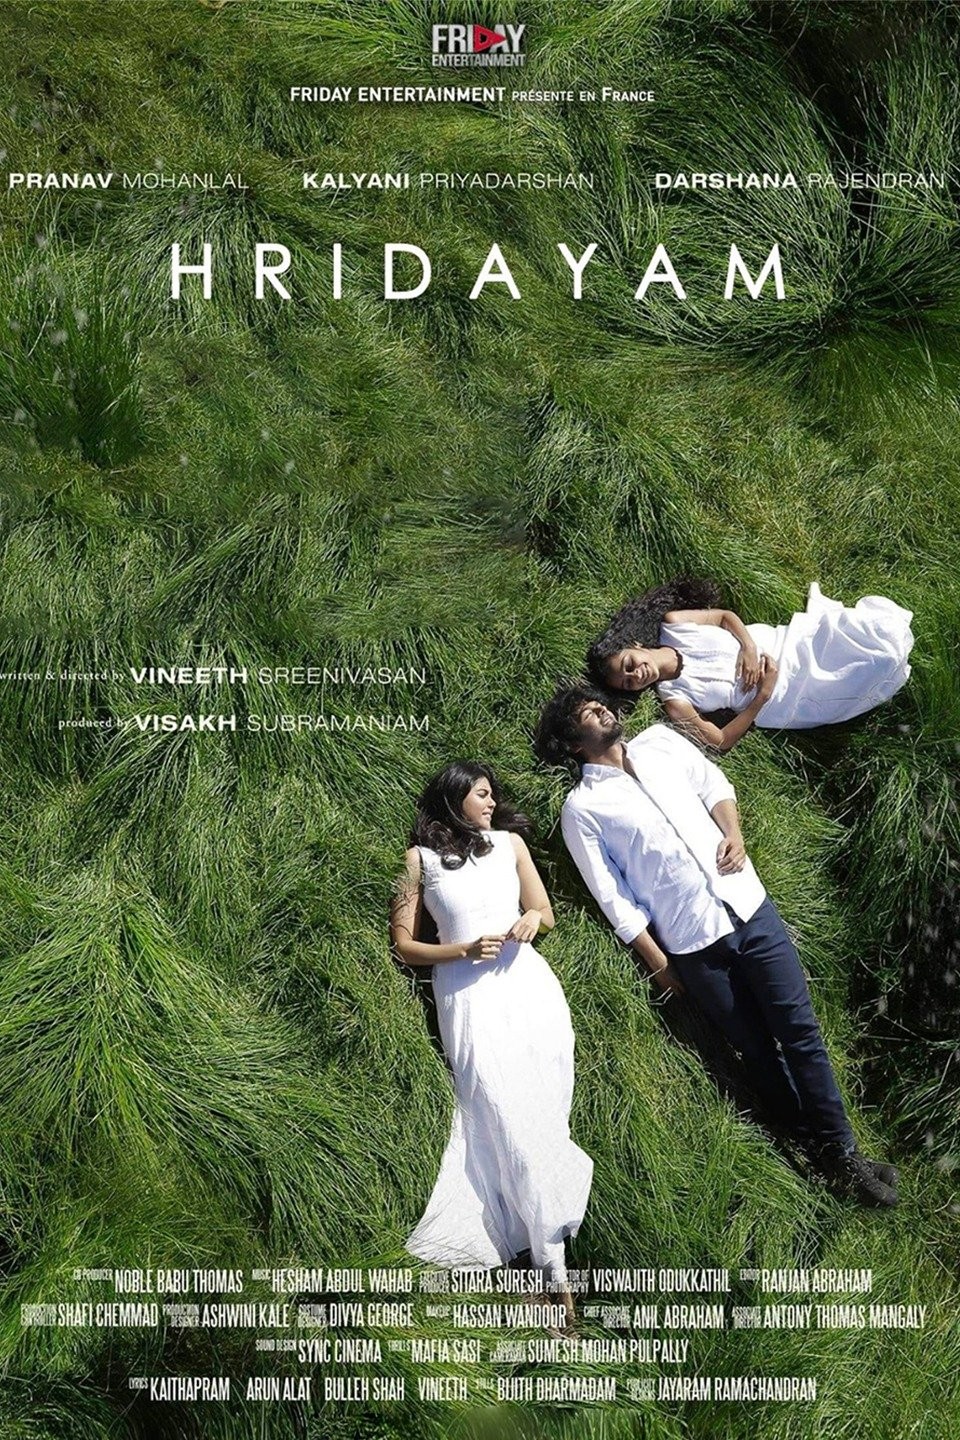 Hridayam Movie (2022) | Release Date, Cast, Trailer, Songs, Streaming  Online at Hotstar